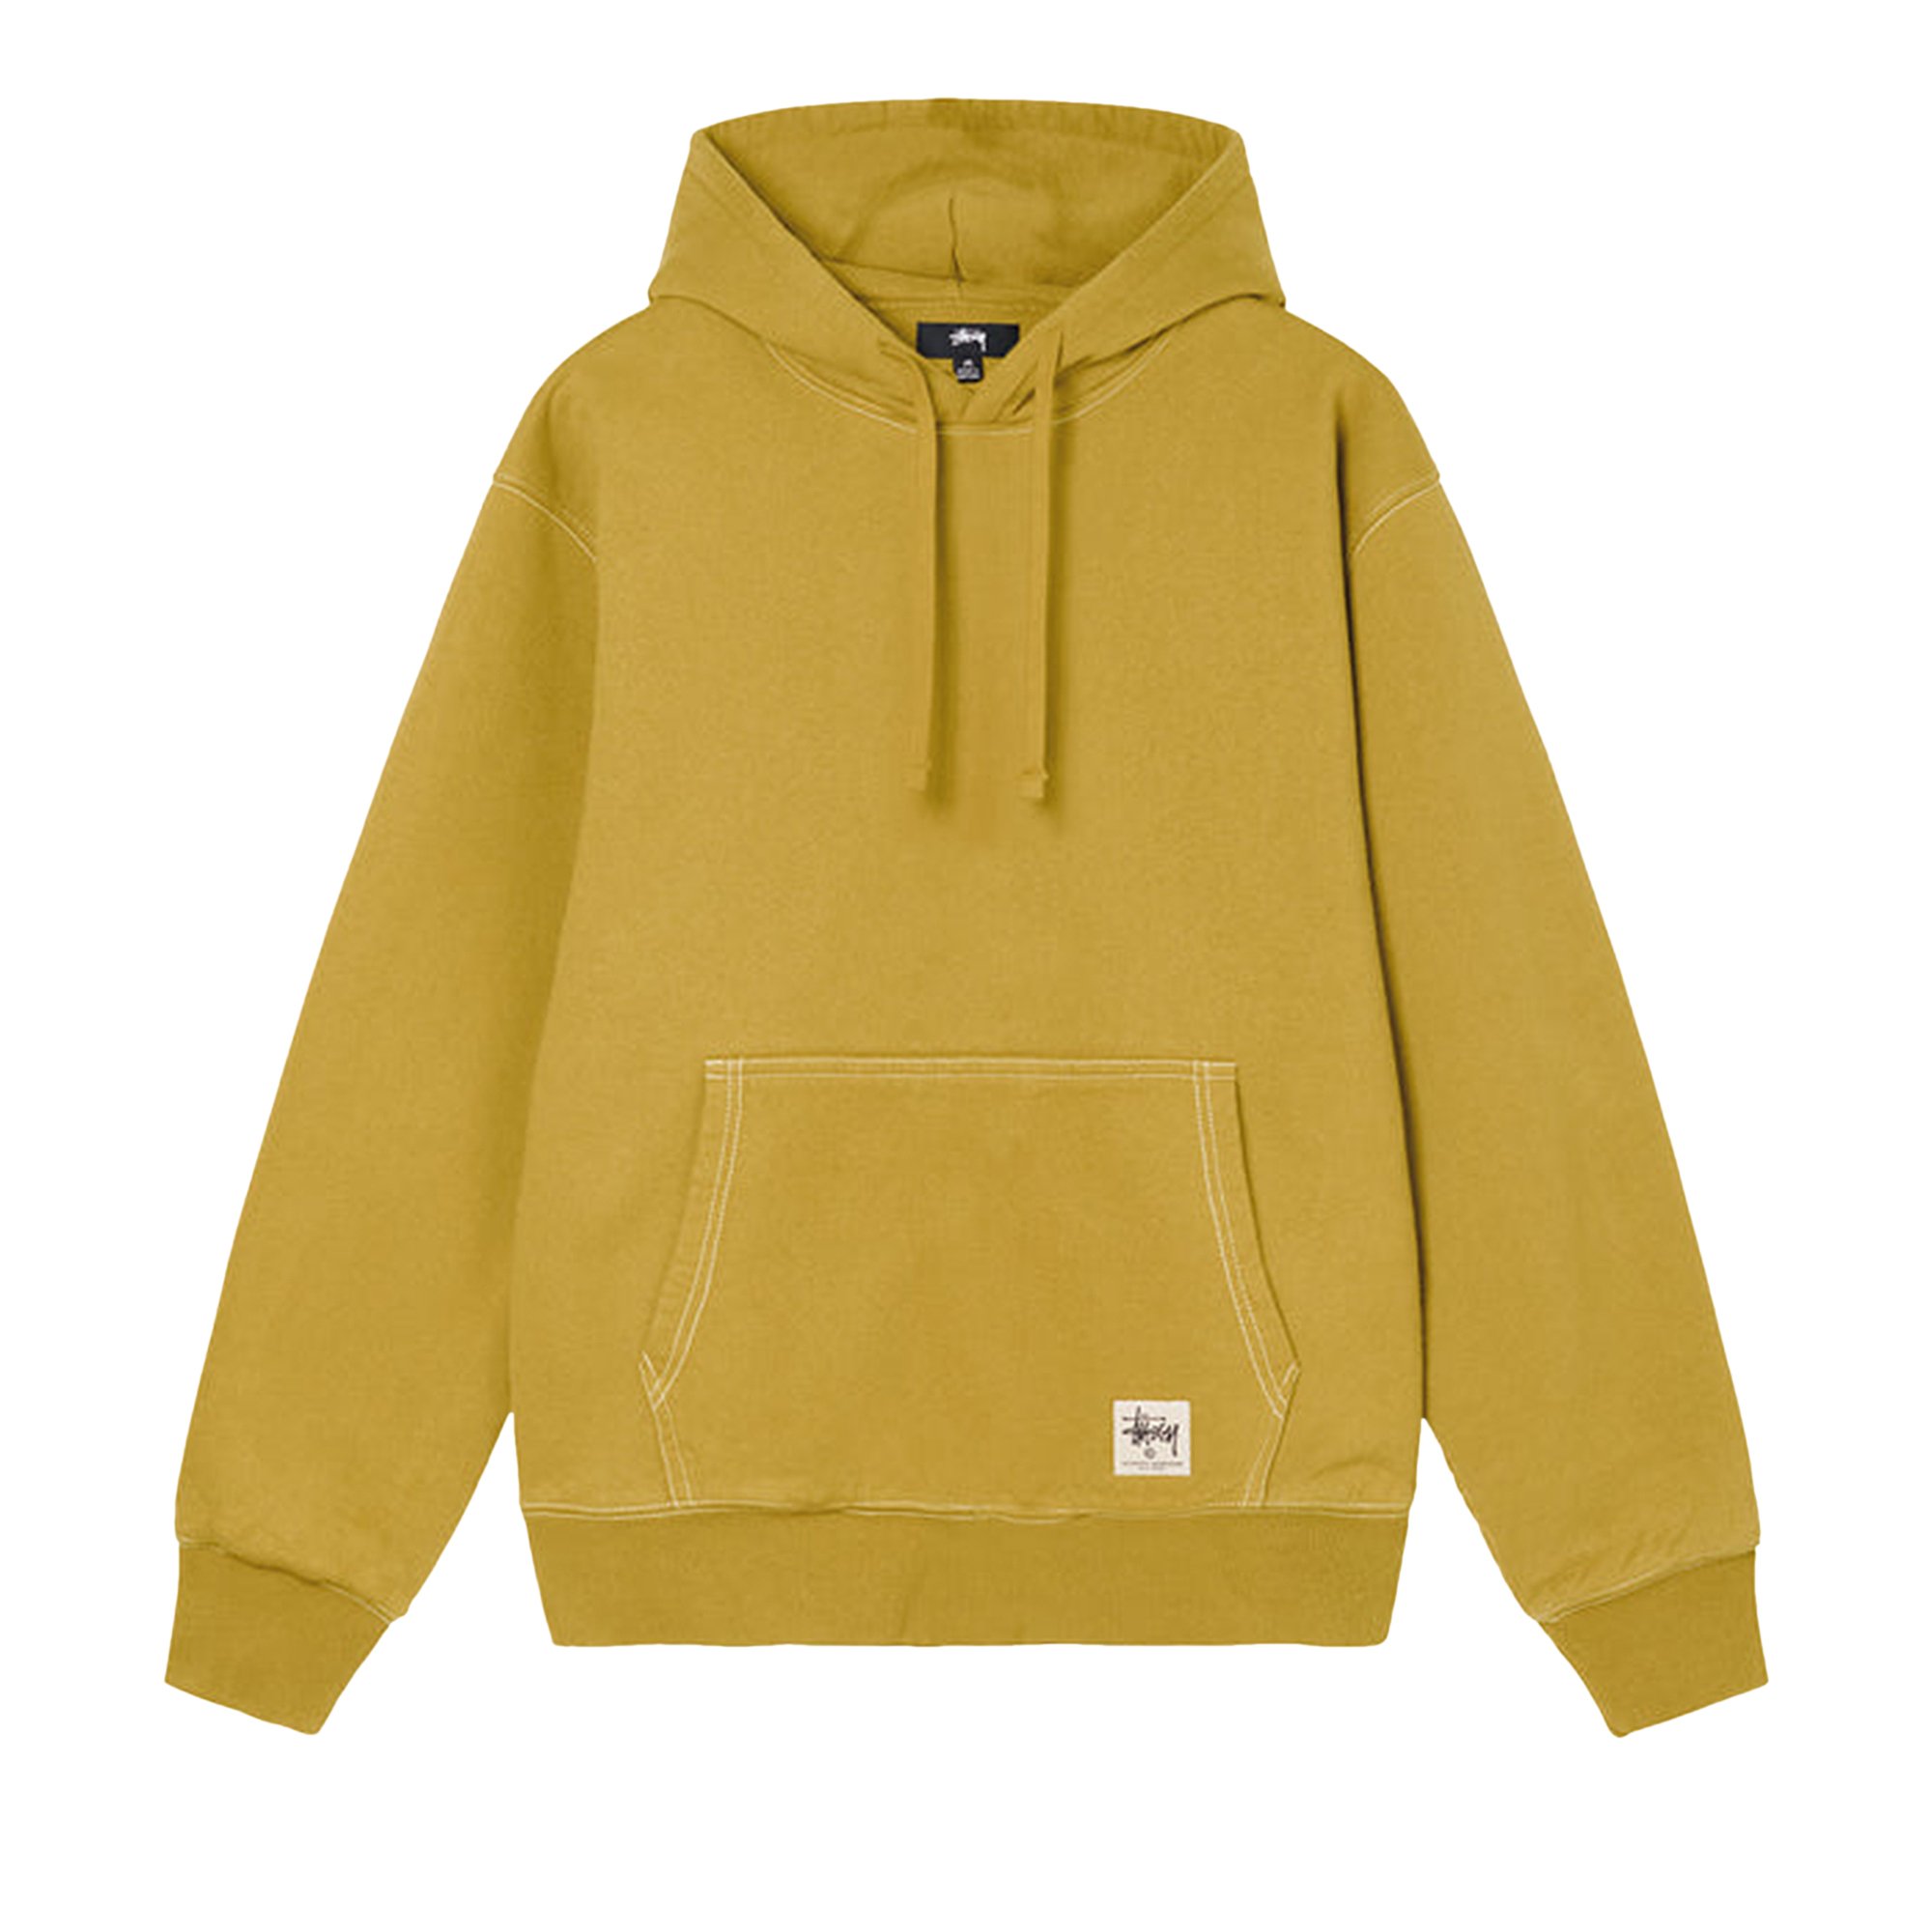 Buy Stussy Contrast Stitch Label Hoodie 'Gold' - 118459 GOLD | GOAT